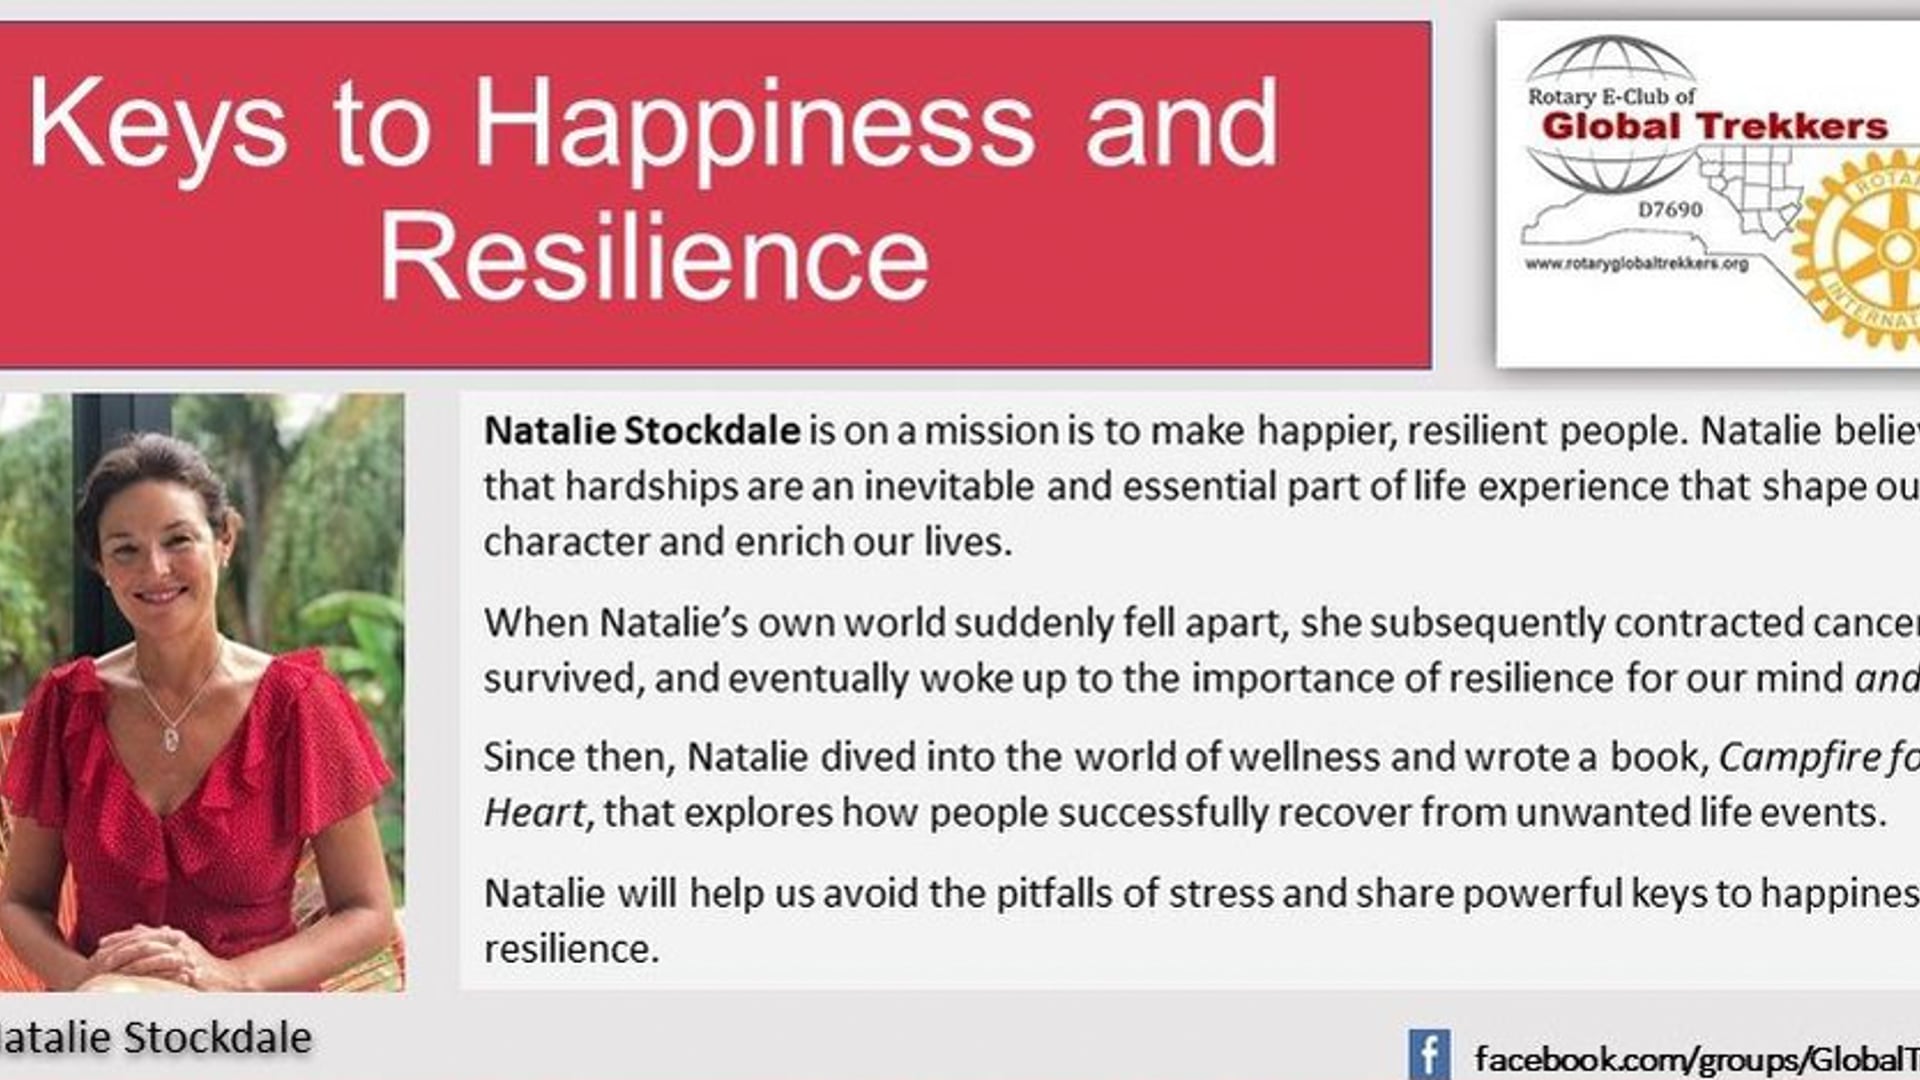 Natalie Stockdale - Keys to Happiness and Resilience